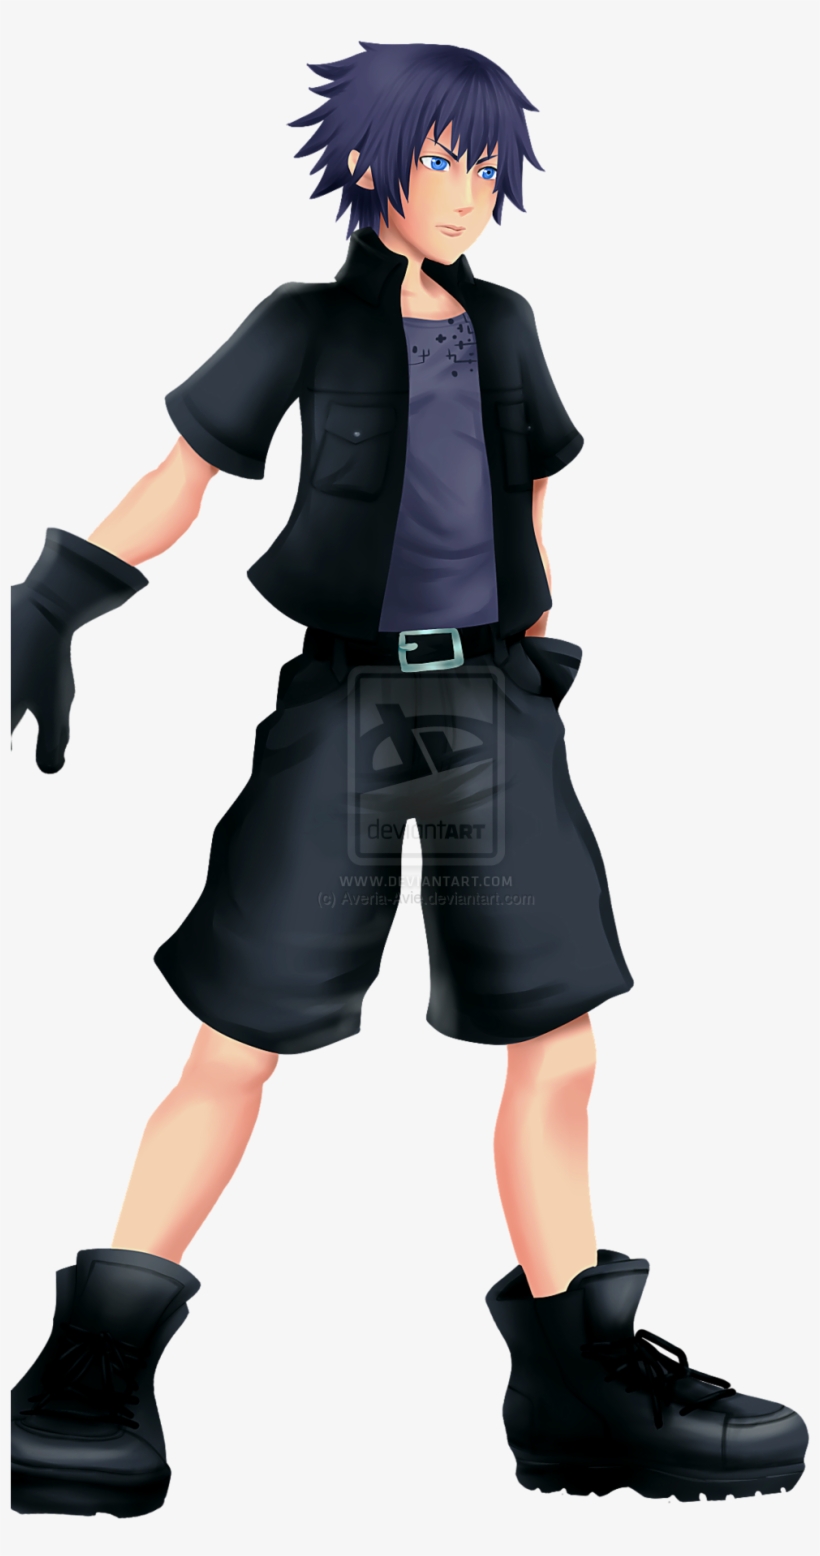 Kh Yuffie - Kingdom Hearts Unchained Cloud Avatar - Free Transparent PNG  Download - PNGkey